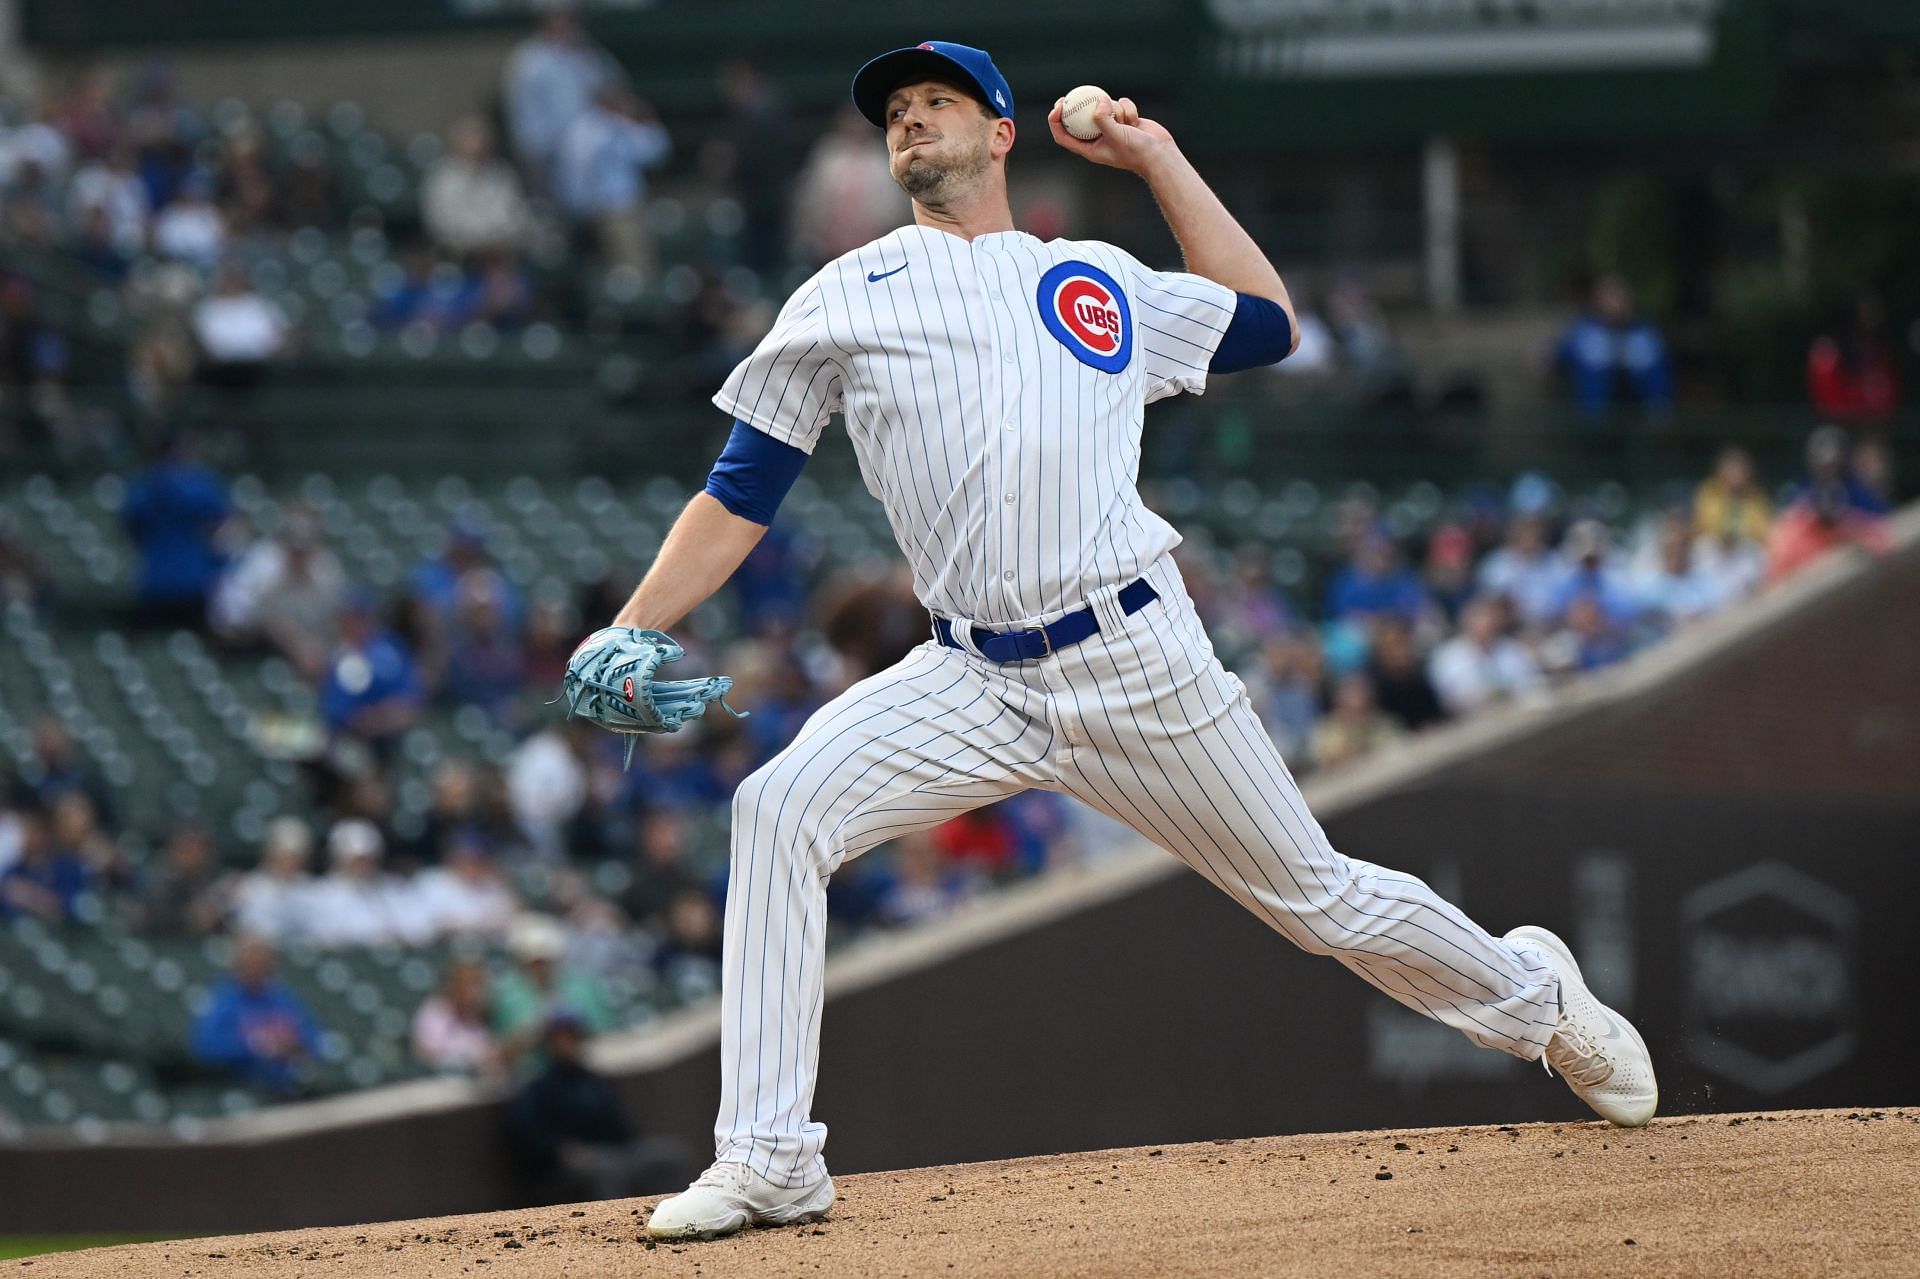 Drew Smyly pitching for the Chicago Cubs